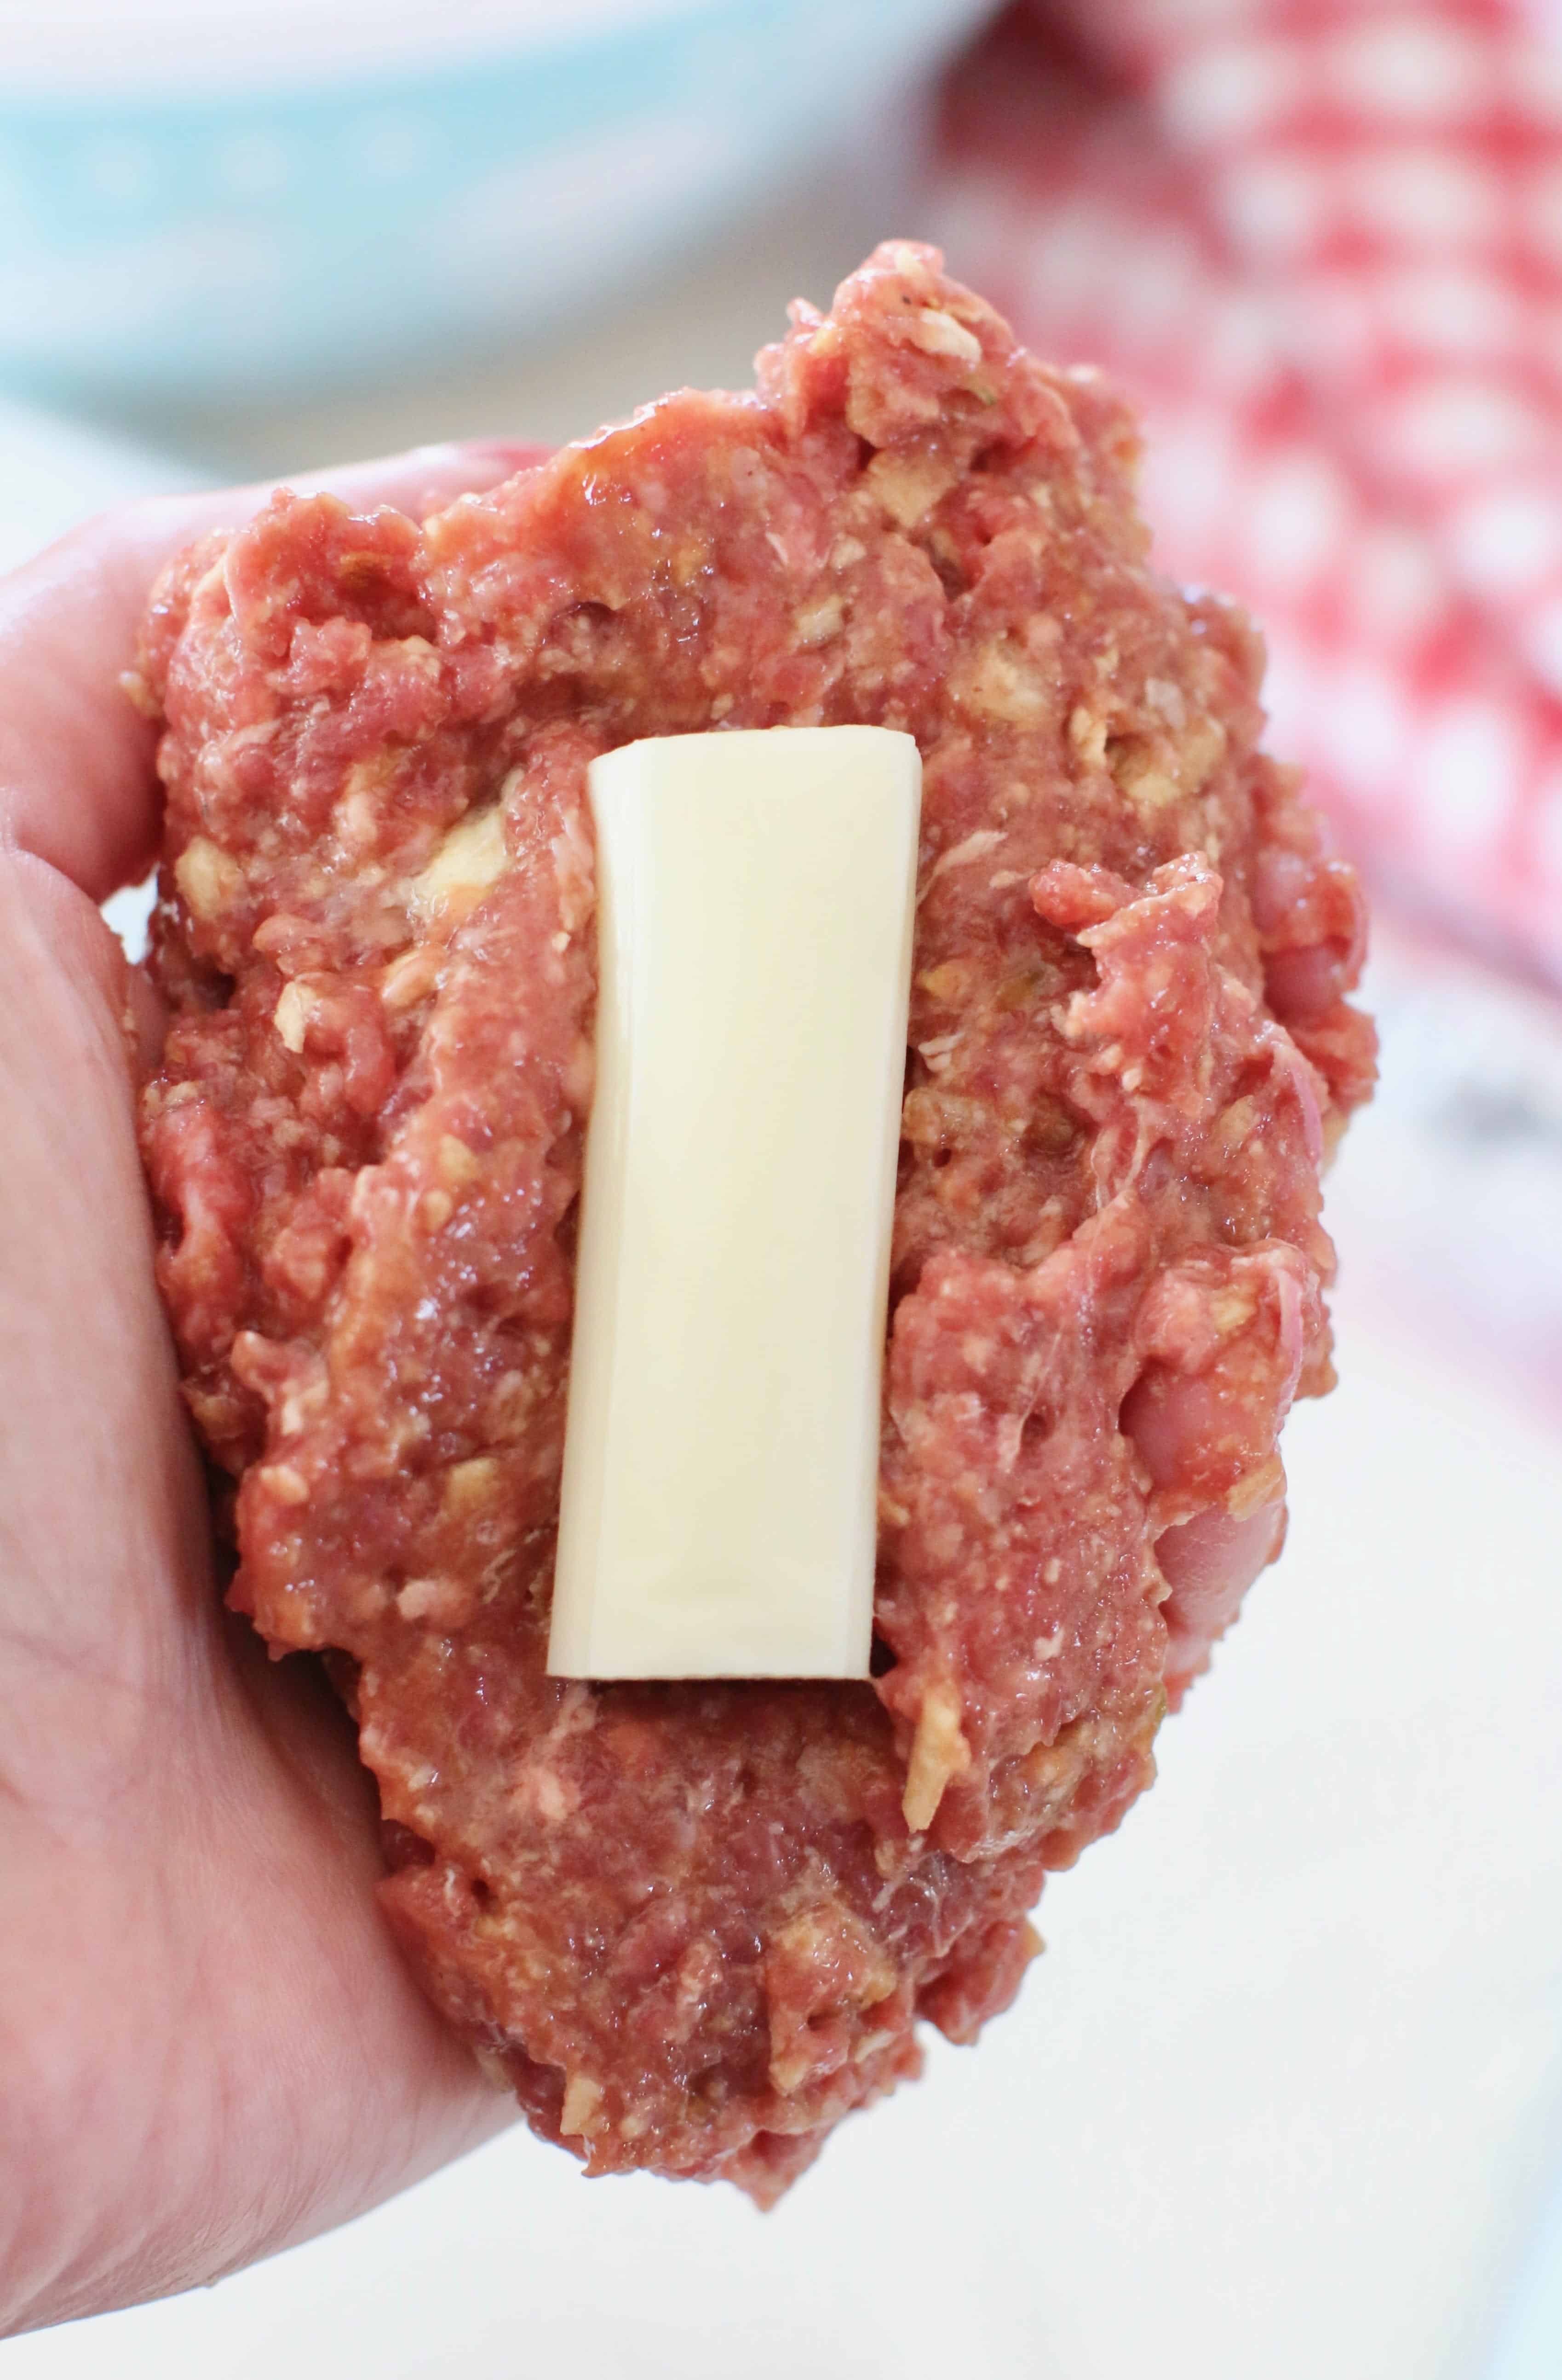 mozarella string cheese stuffed into meatloaf mixture.